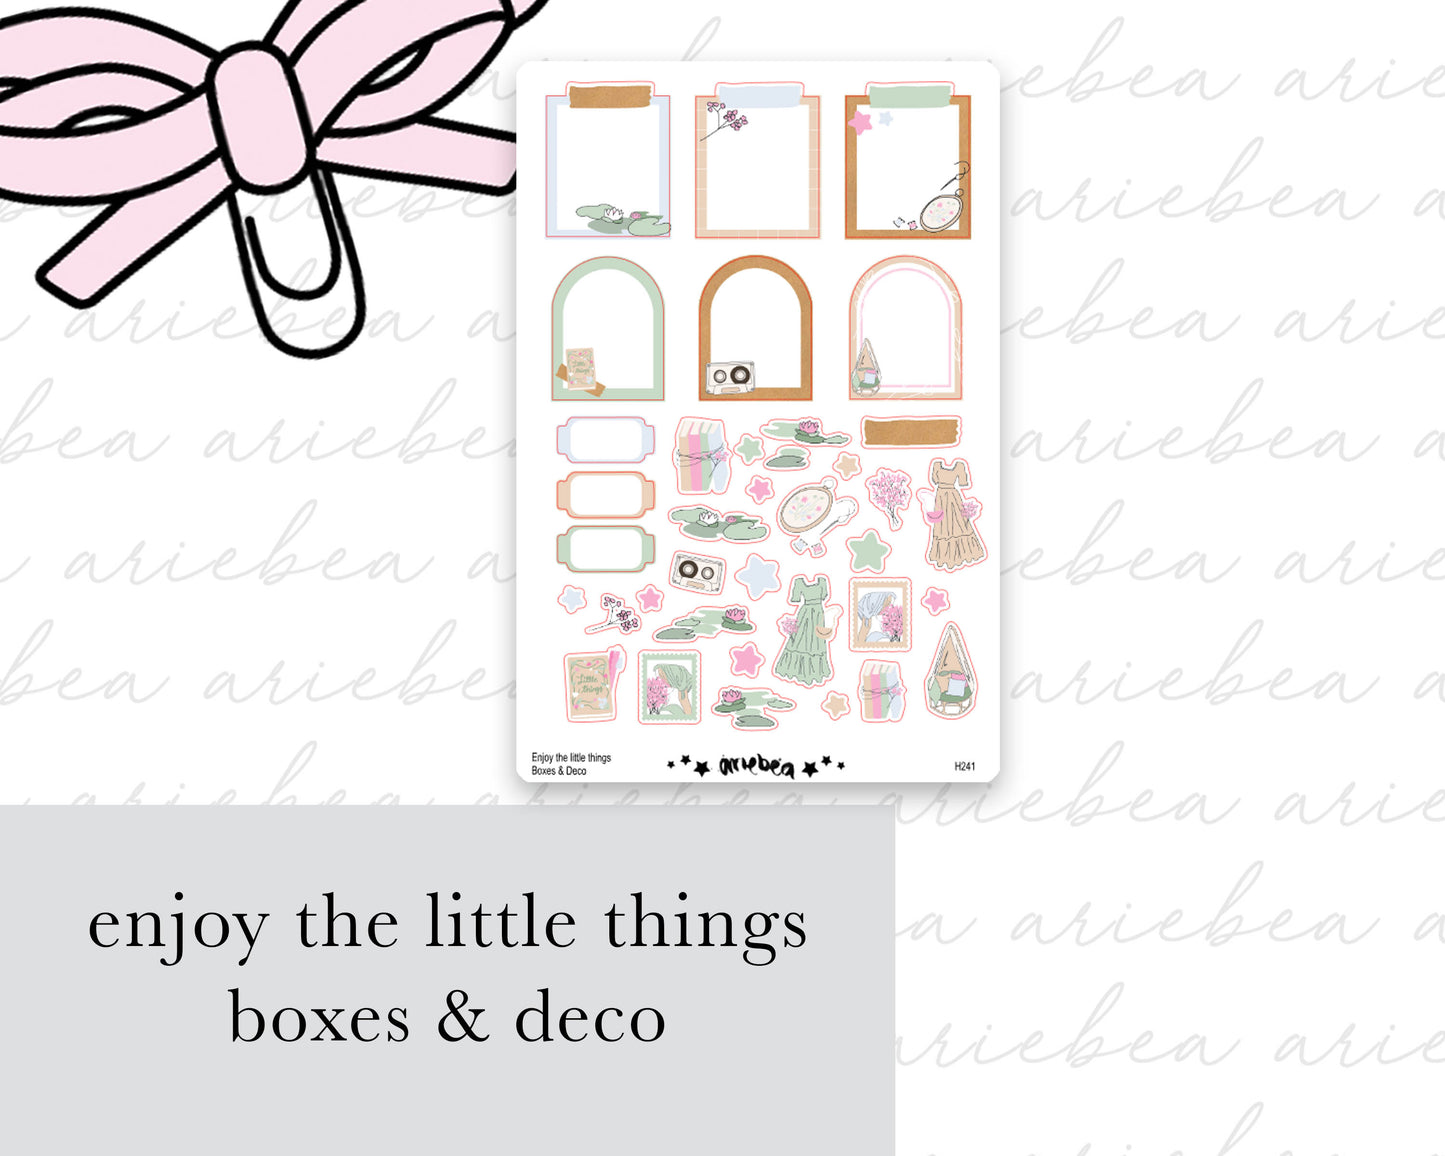 Enjoy The Little Things Collection Boxes & Deco